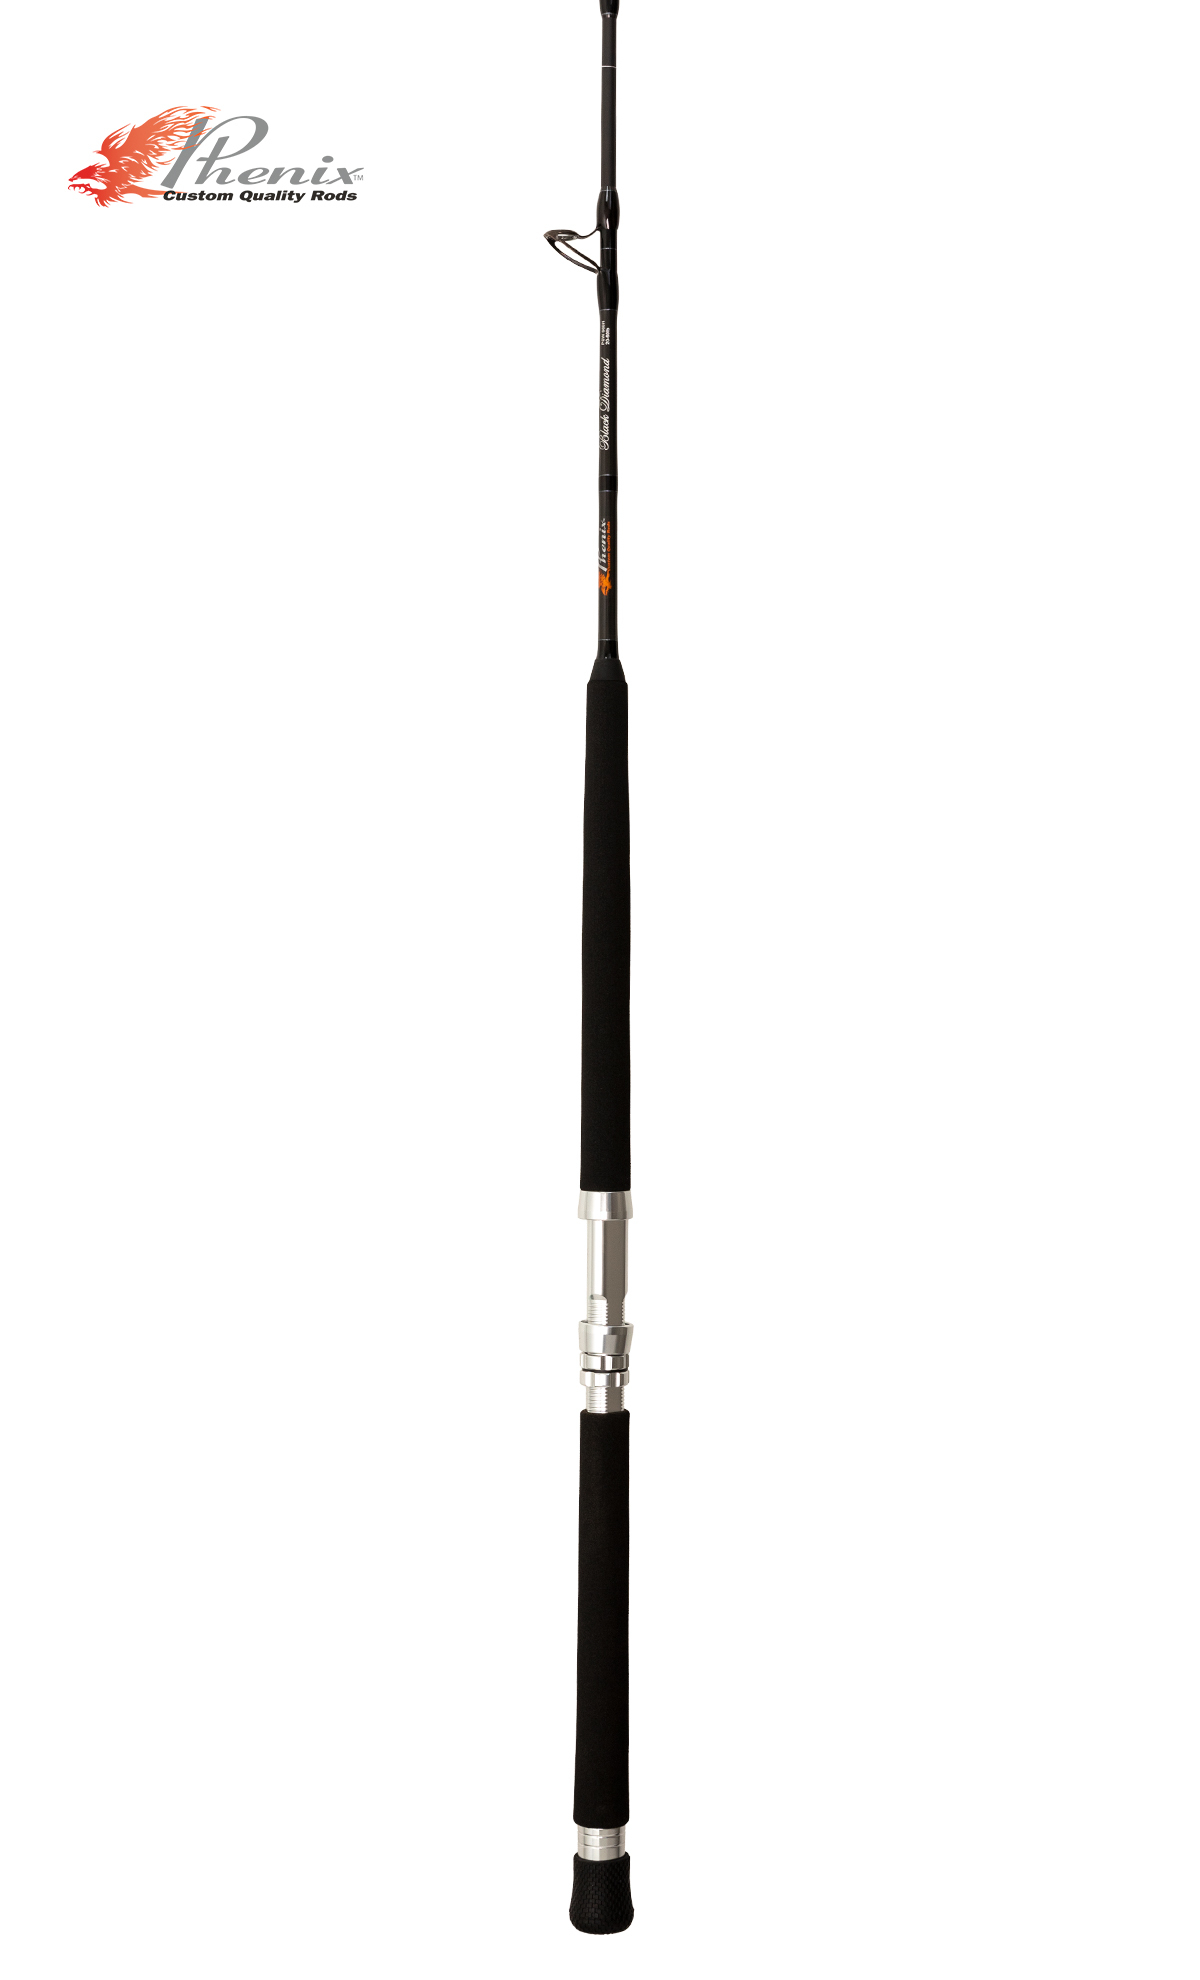 Phenix Black Diamond, Casting Rod, 20-60# Mod-Fast, 1 Pieces PSW700H-Silver  RS with Free S&H — CampSaver